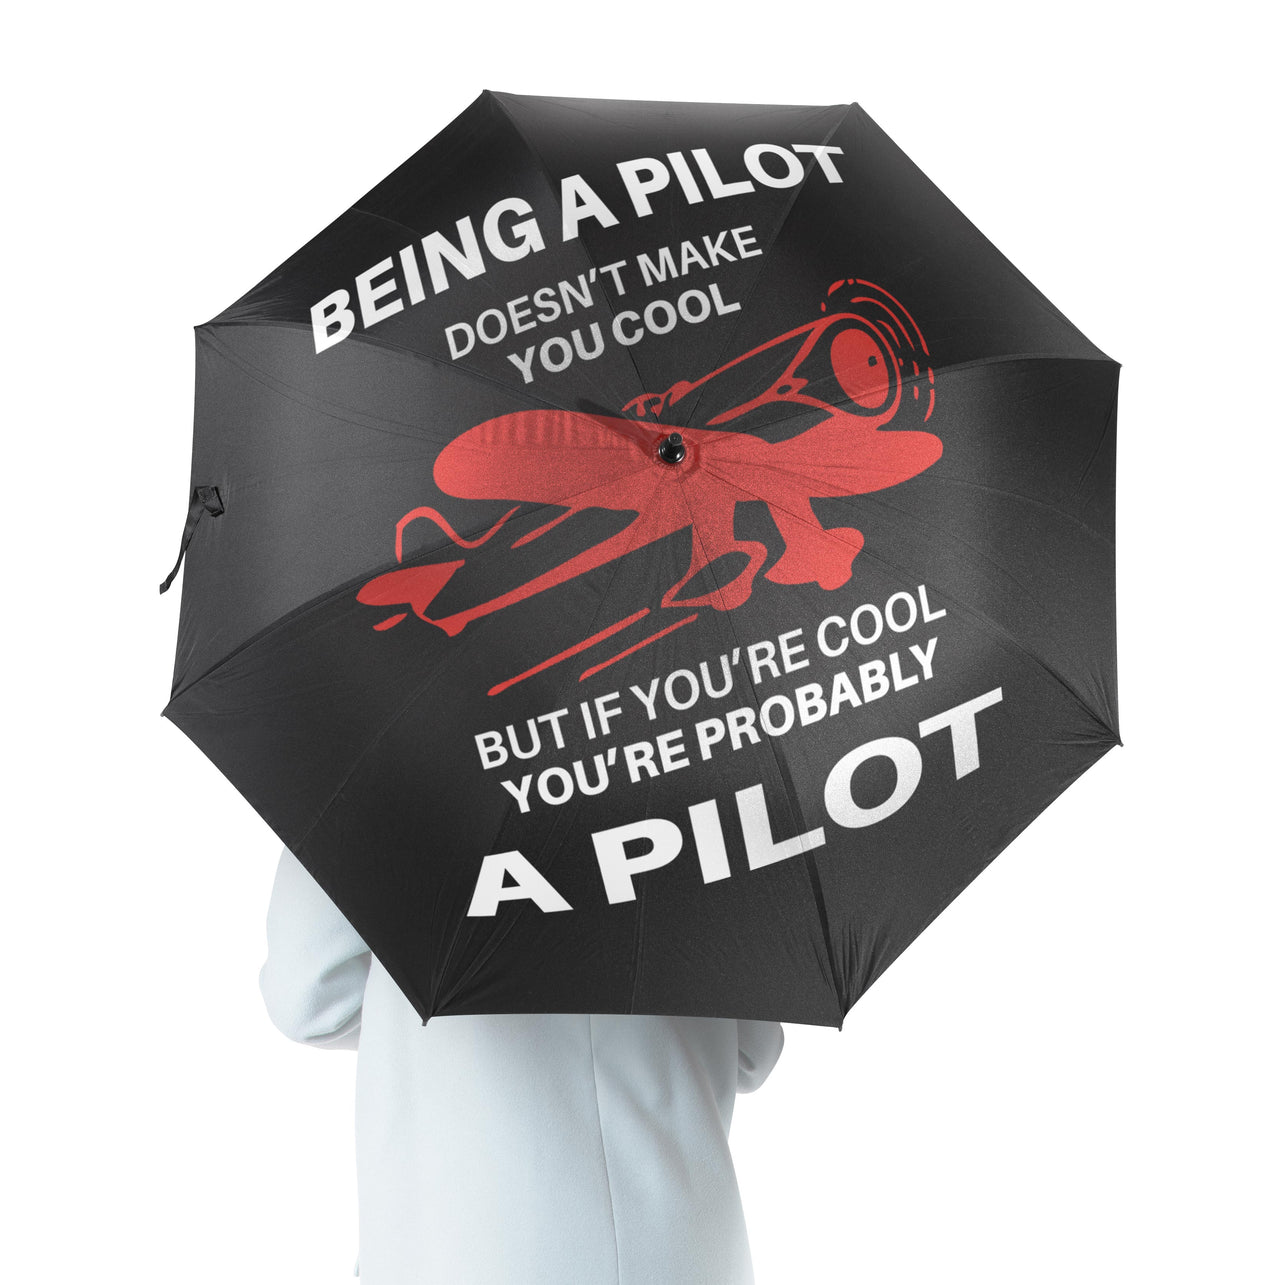 If You're Cool You're Probably a Pilot Designed Umbrella